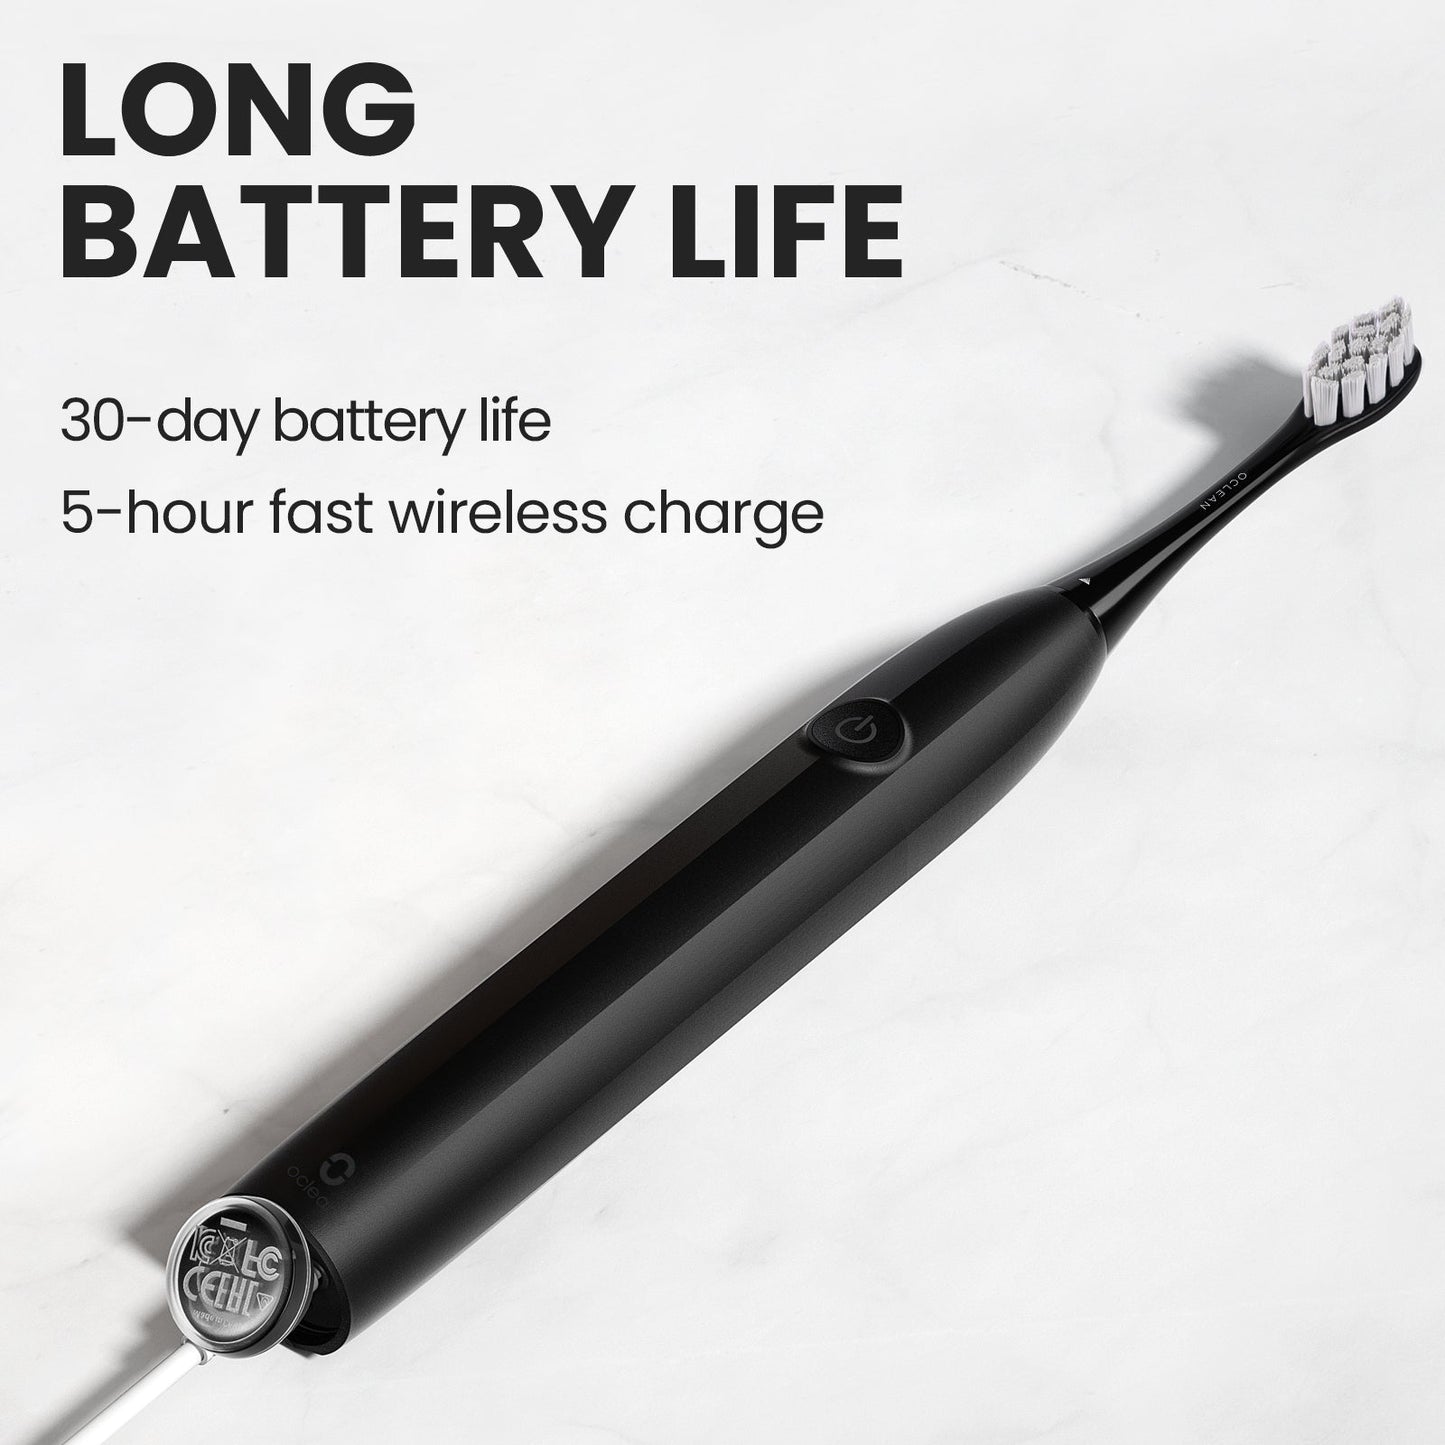 Oclean Endurance Electric Toothbrush Toothbrushes   Oclean